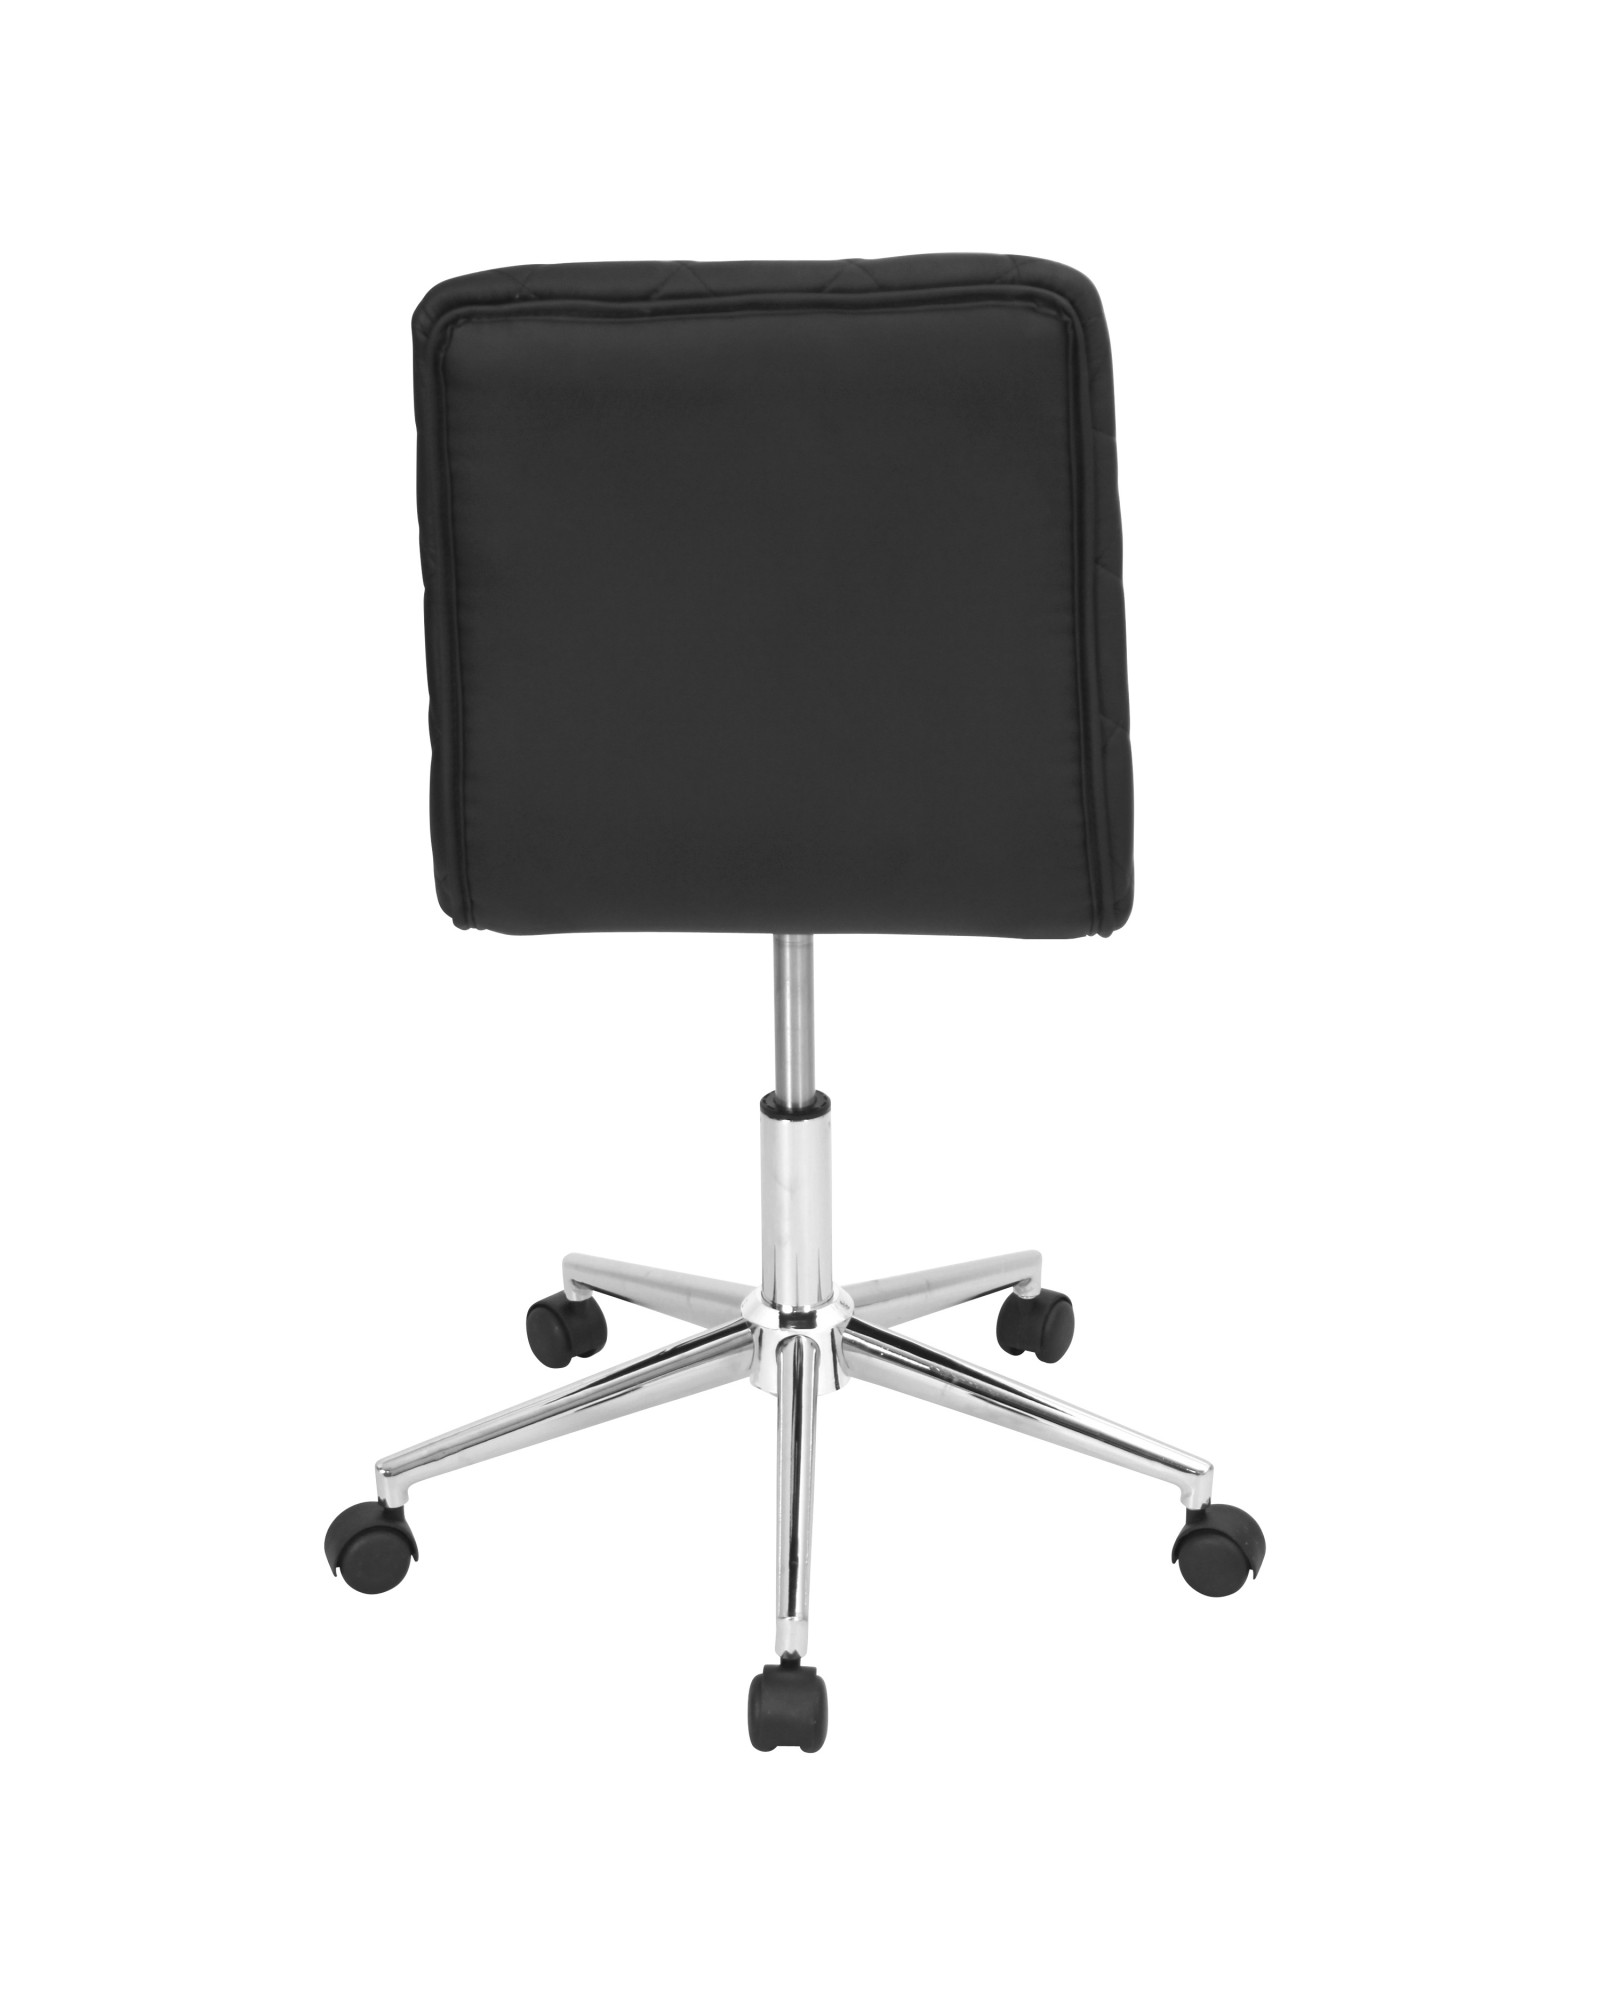 Caviar Contemporary Adjustable Office Chair in Black Faux Leather